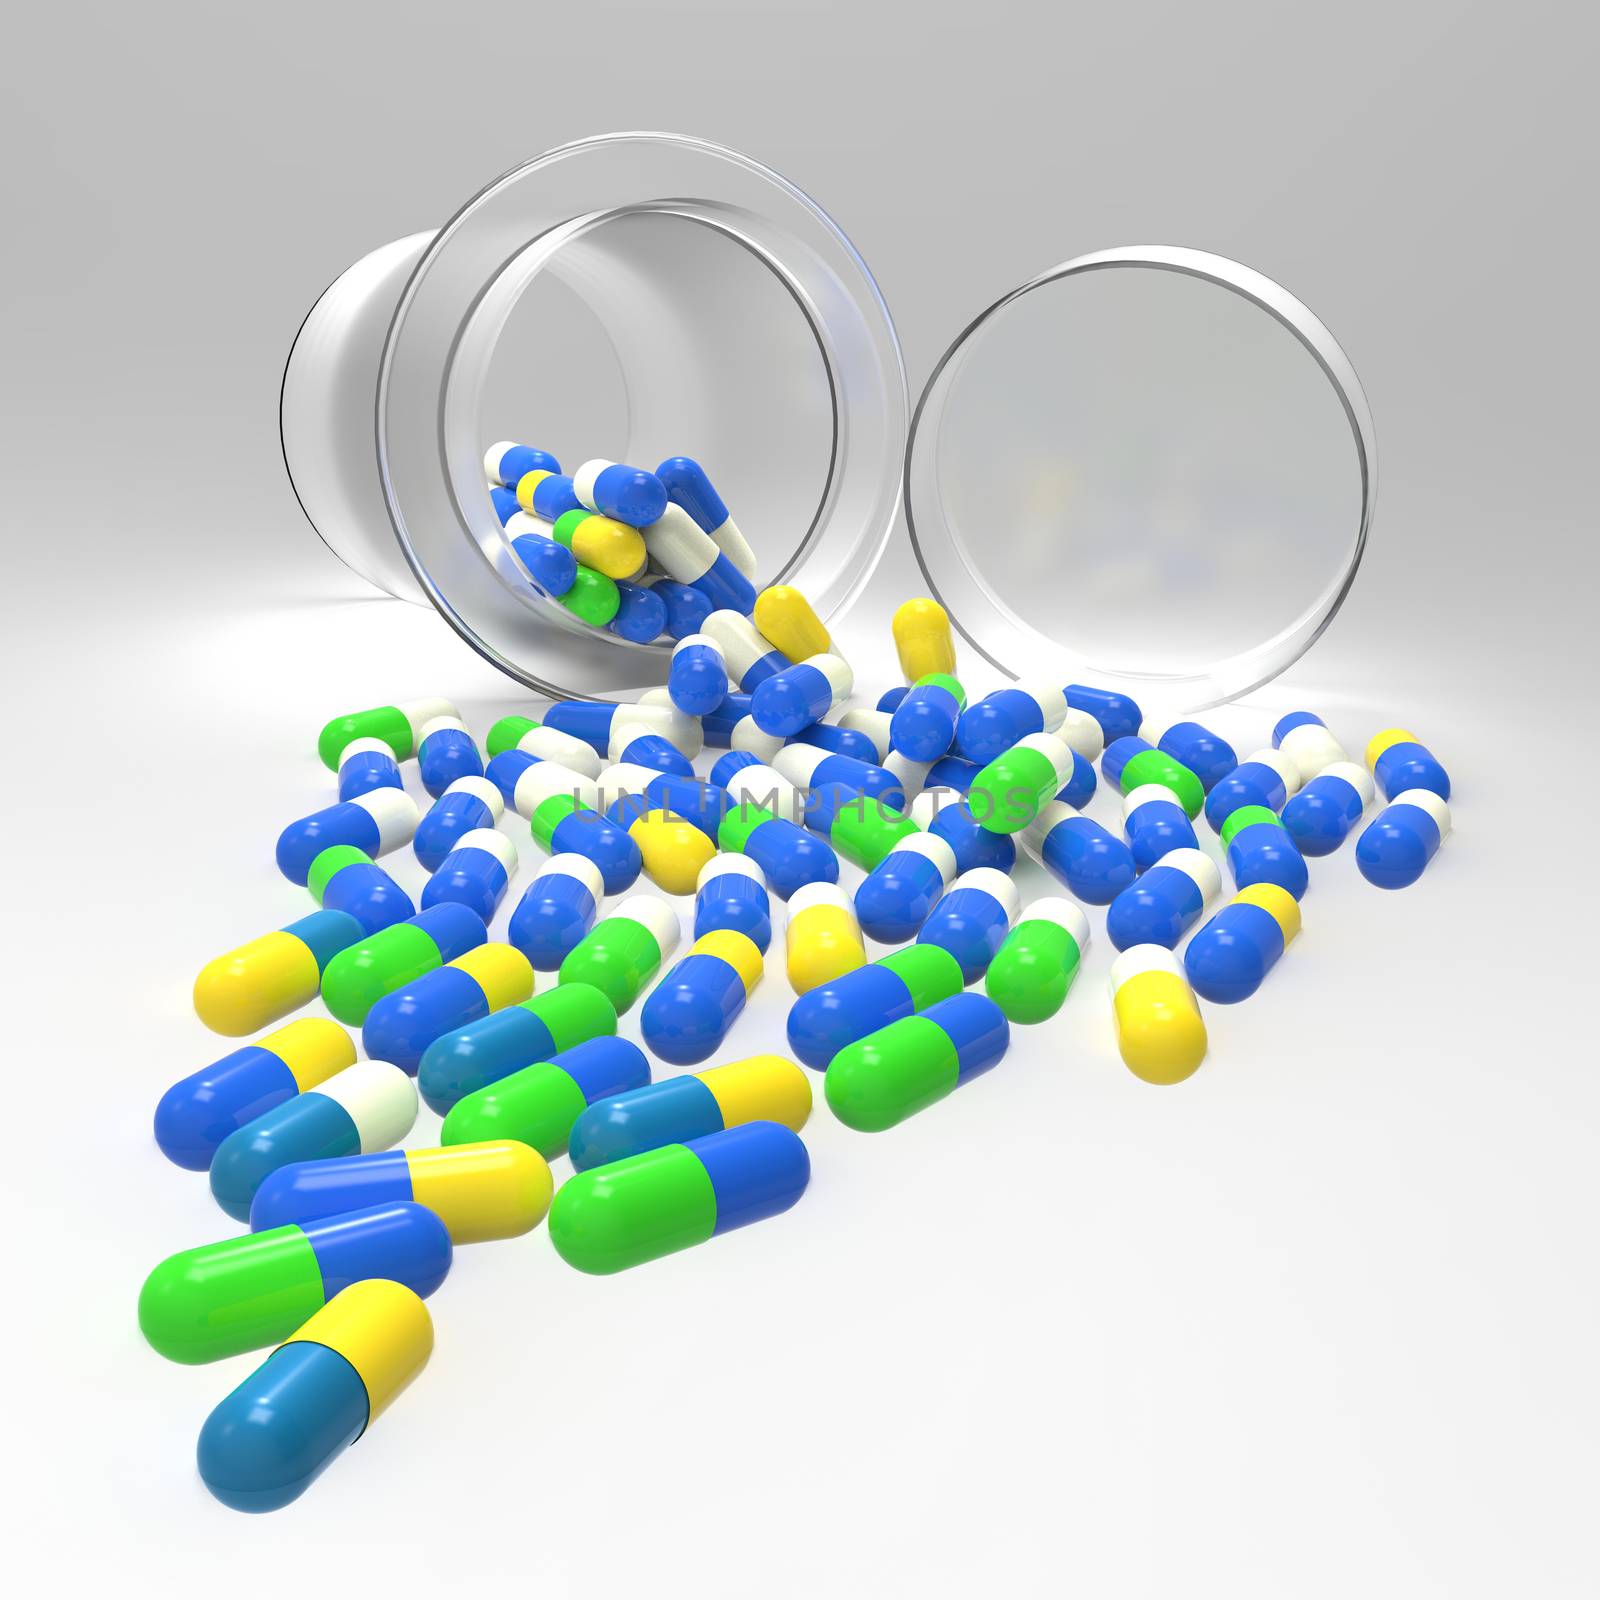 Pills 3d spilling out of pill bottle on white  by everythingpossible